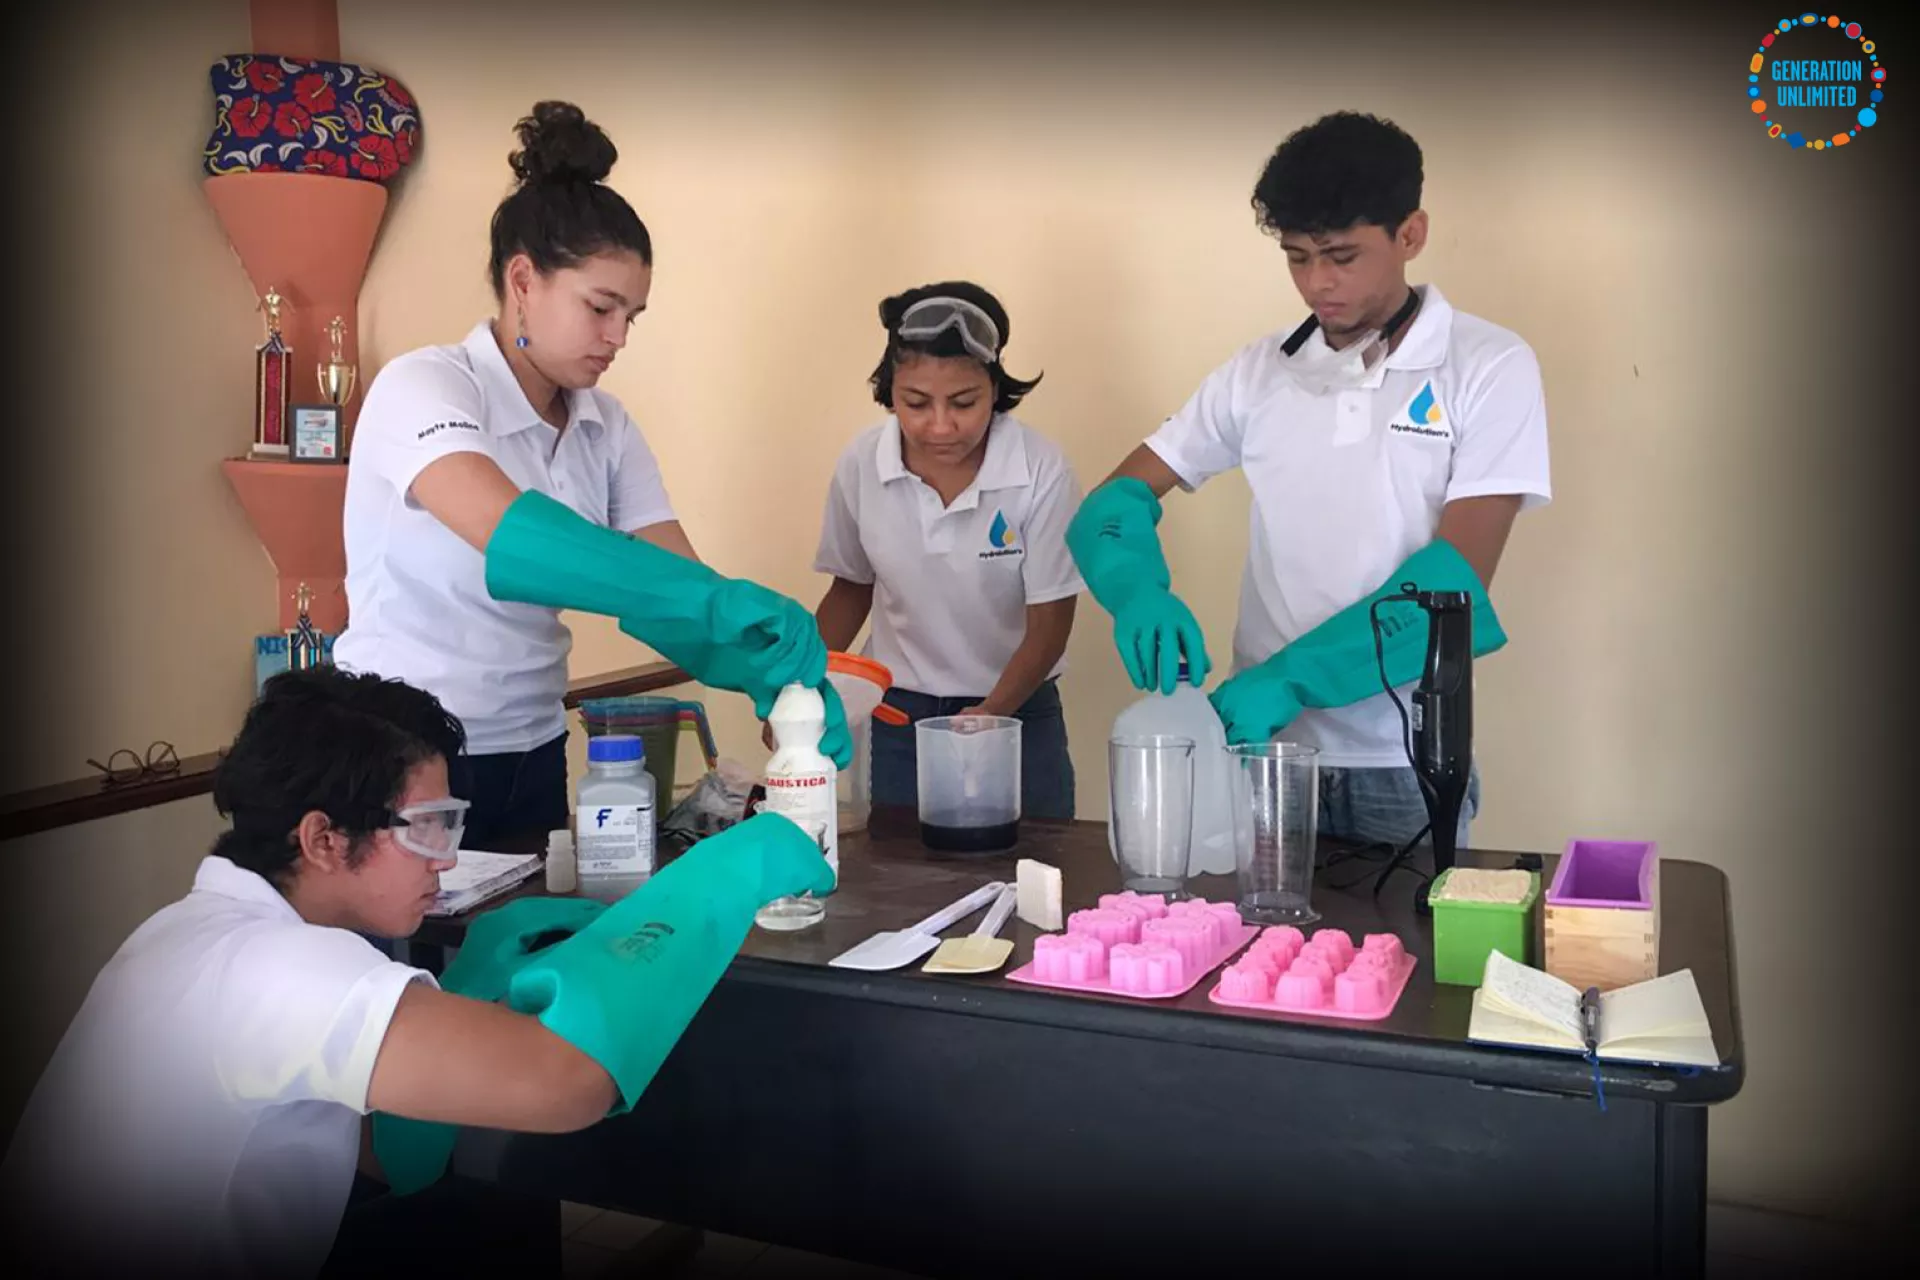 The four youngsters behind Hydrolution operating vials and equipment to produce the soap